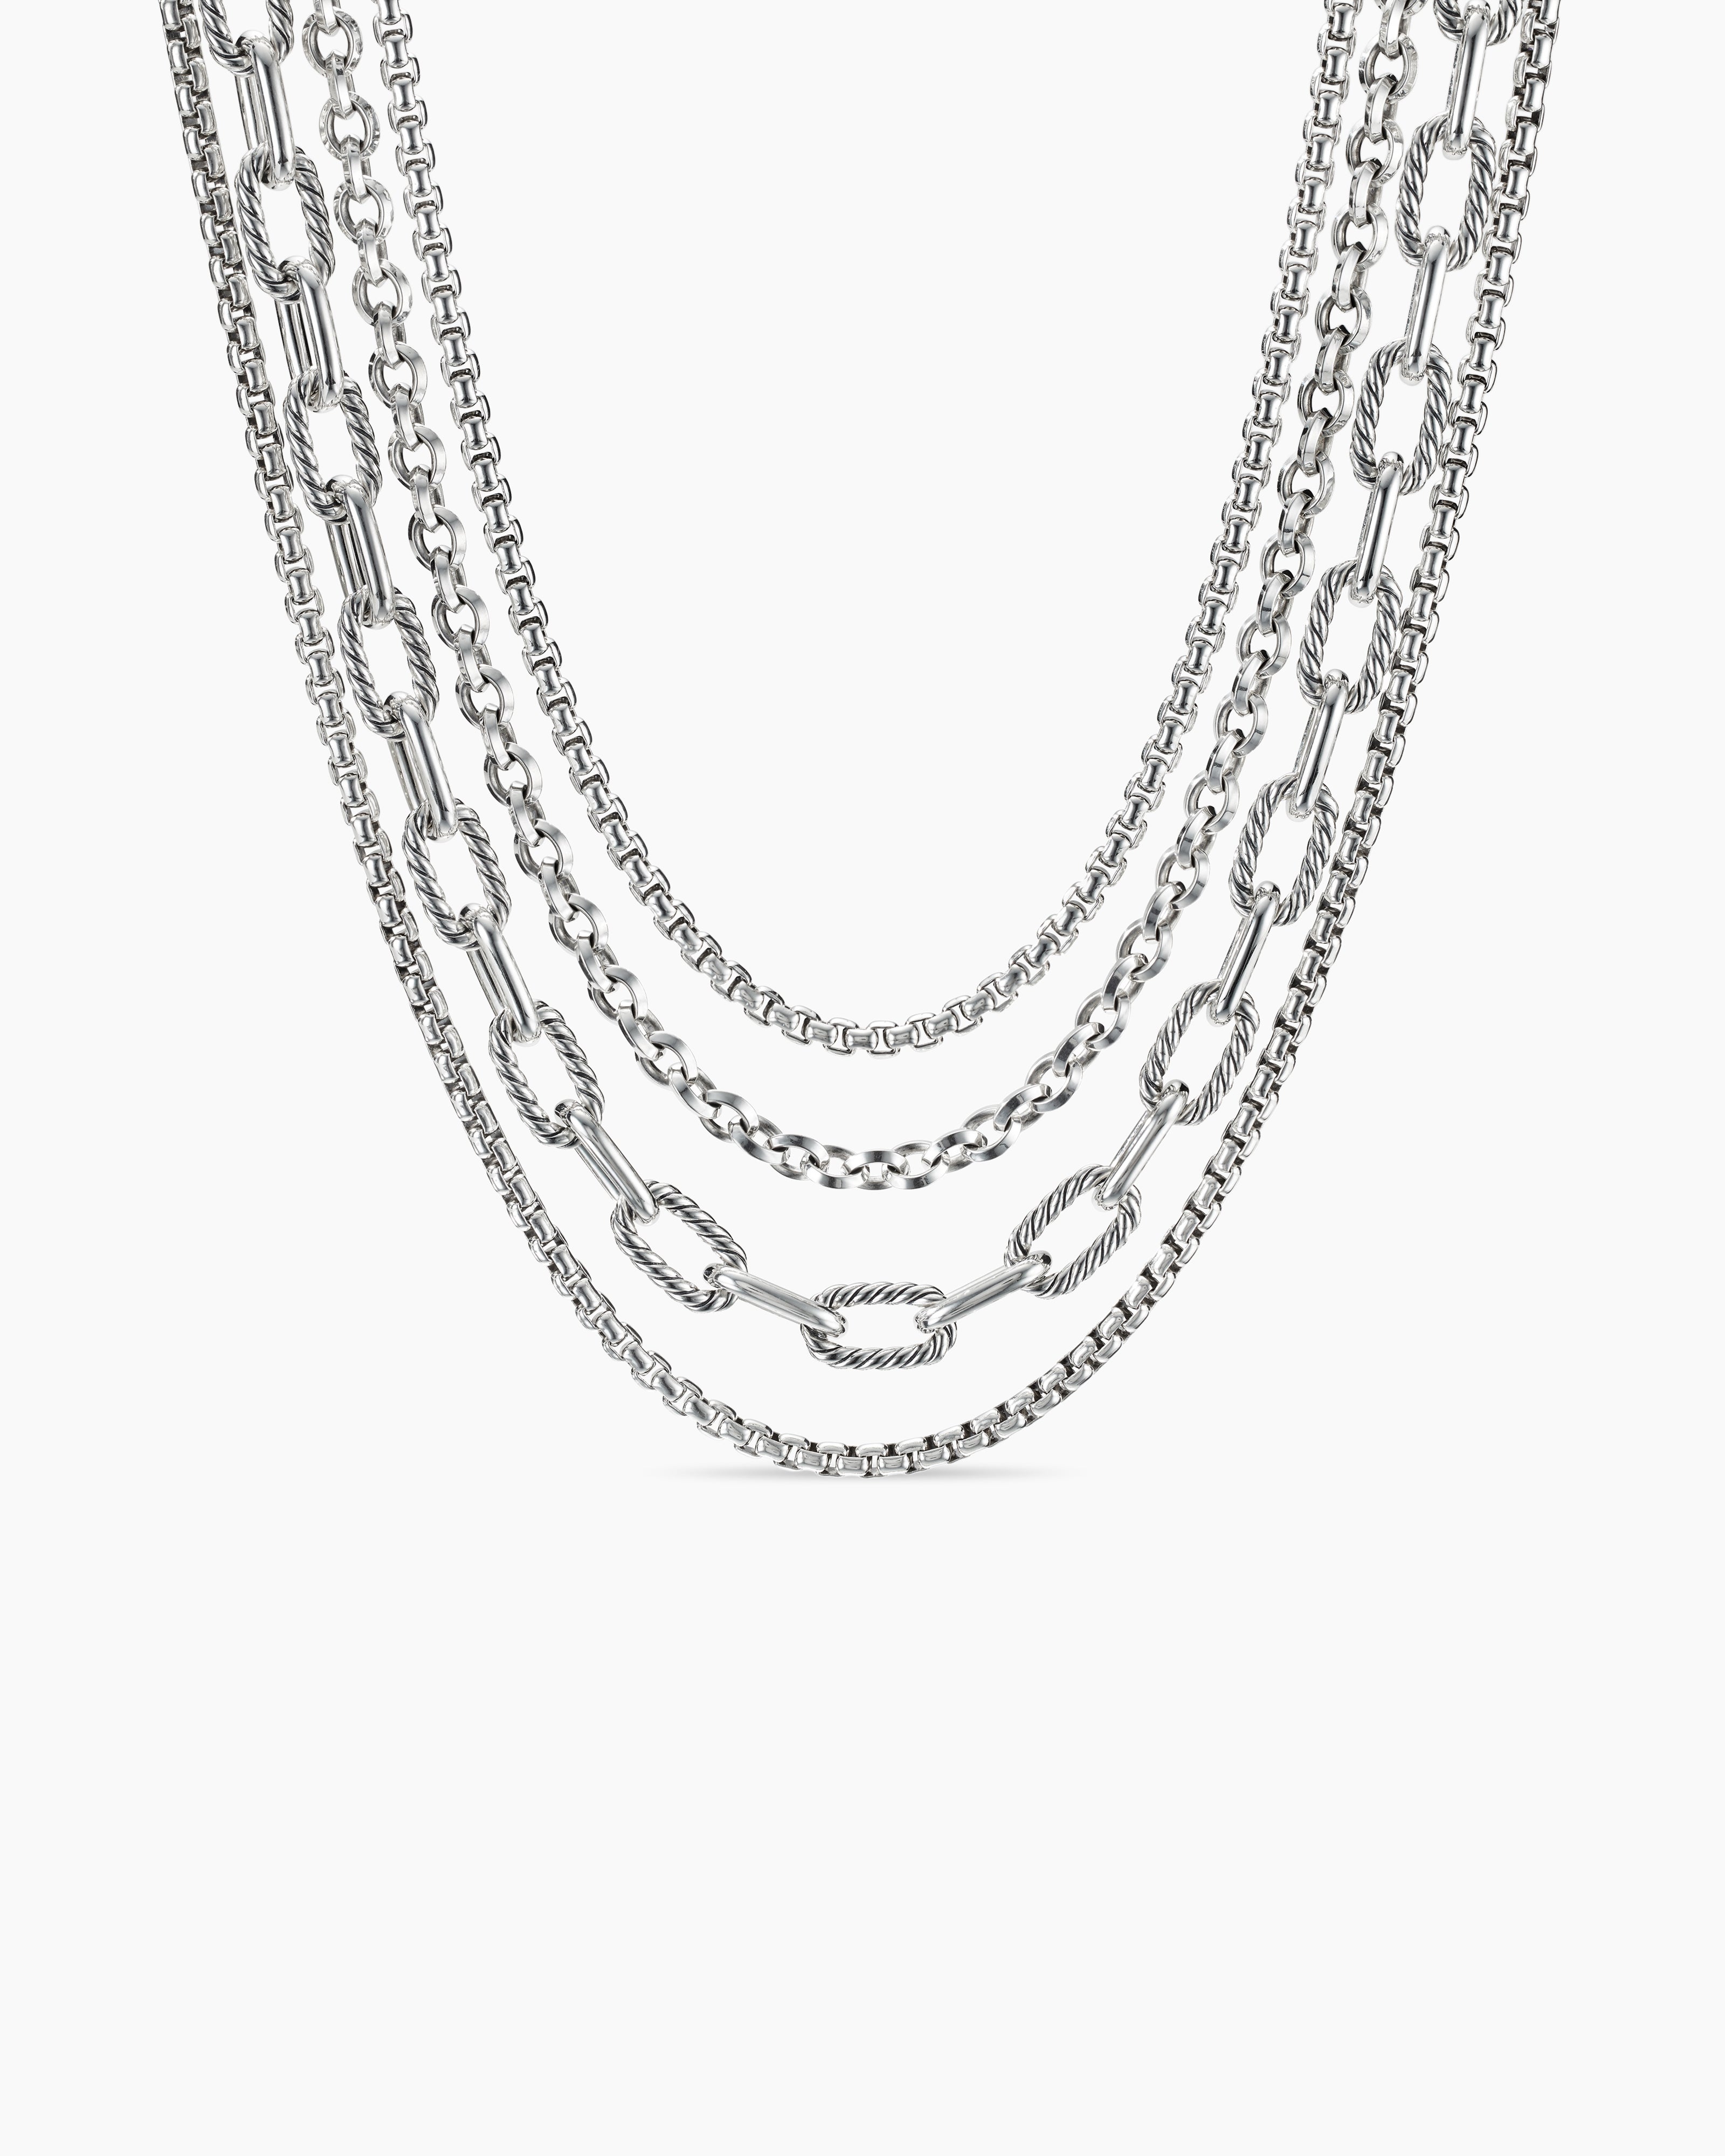 Shop Sterling Silver Chain at the best prices online